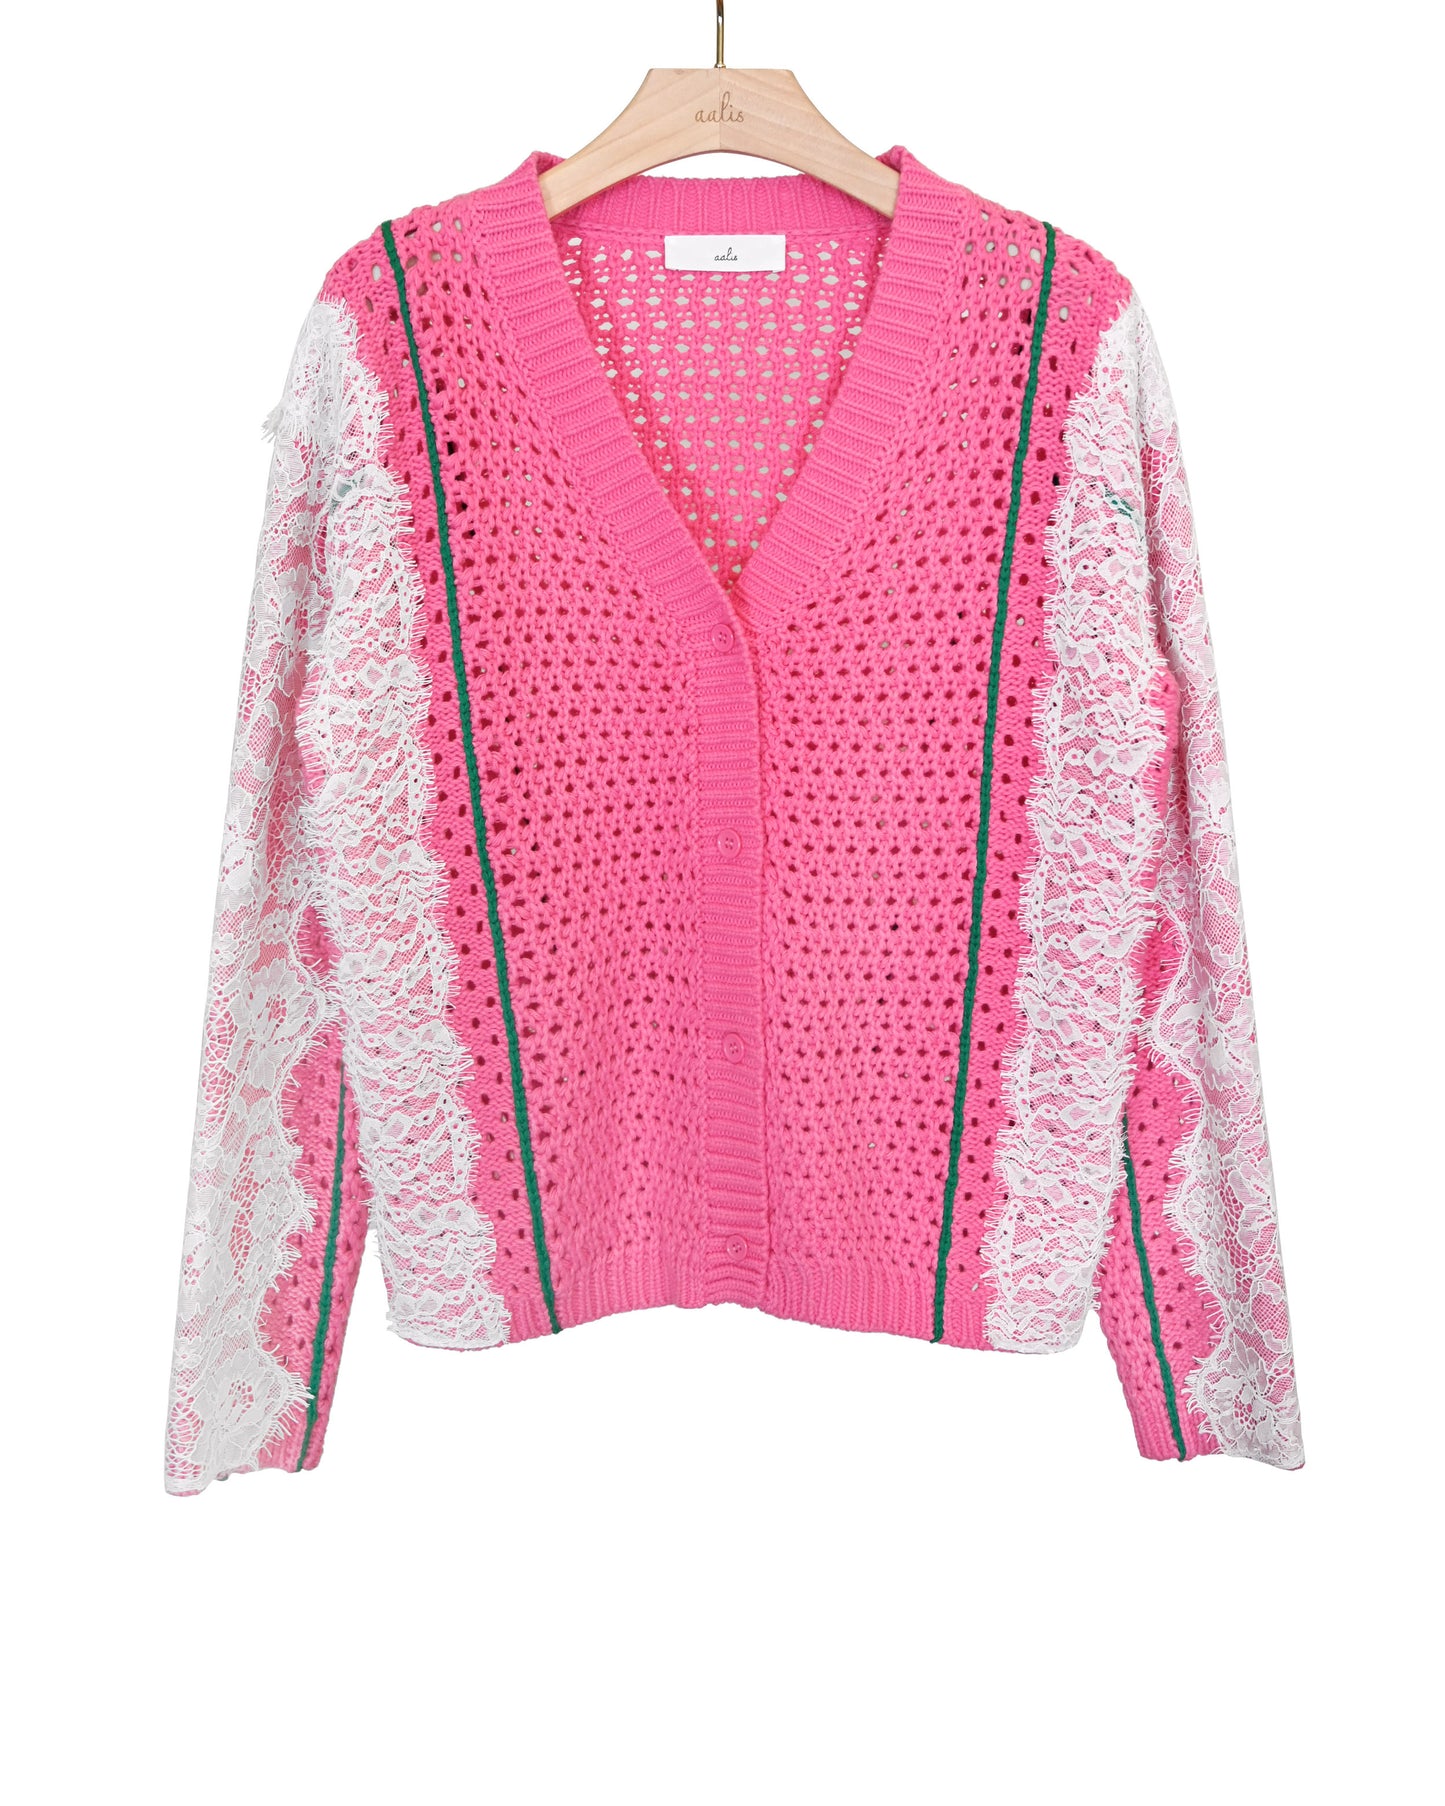 aalis MICKE crochet lace trim sleeves cardigan (Pink mix)